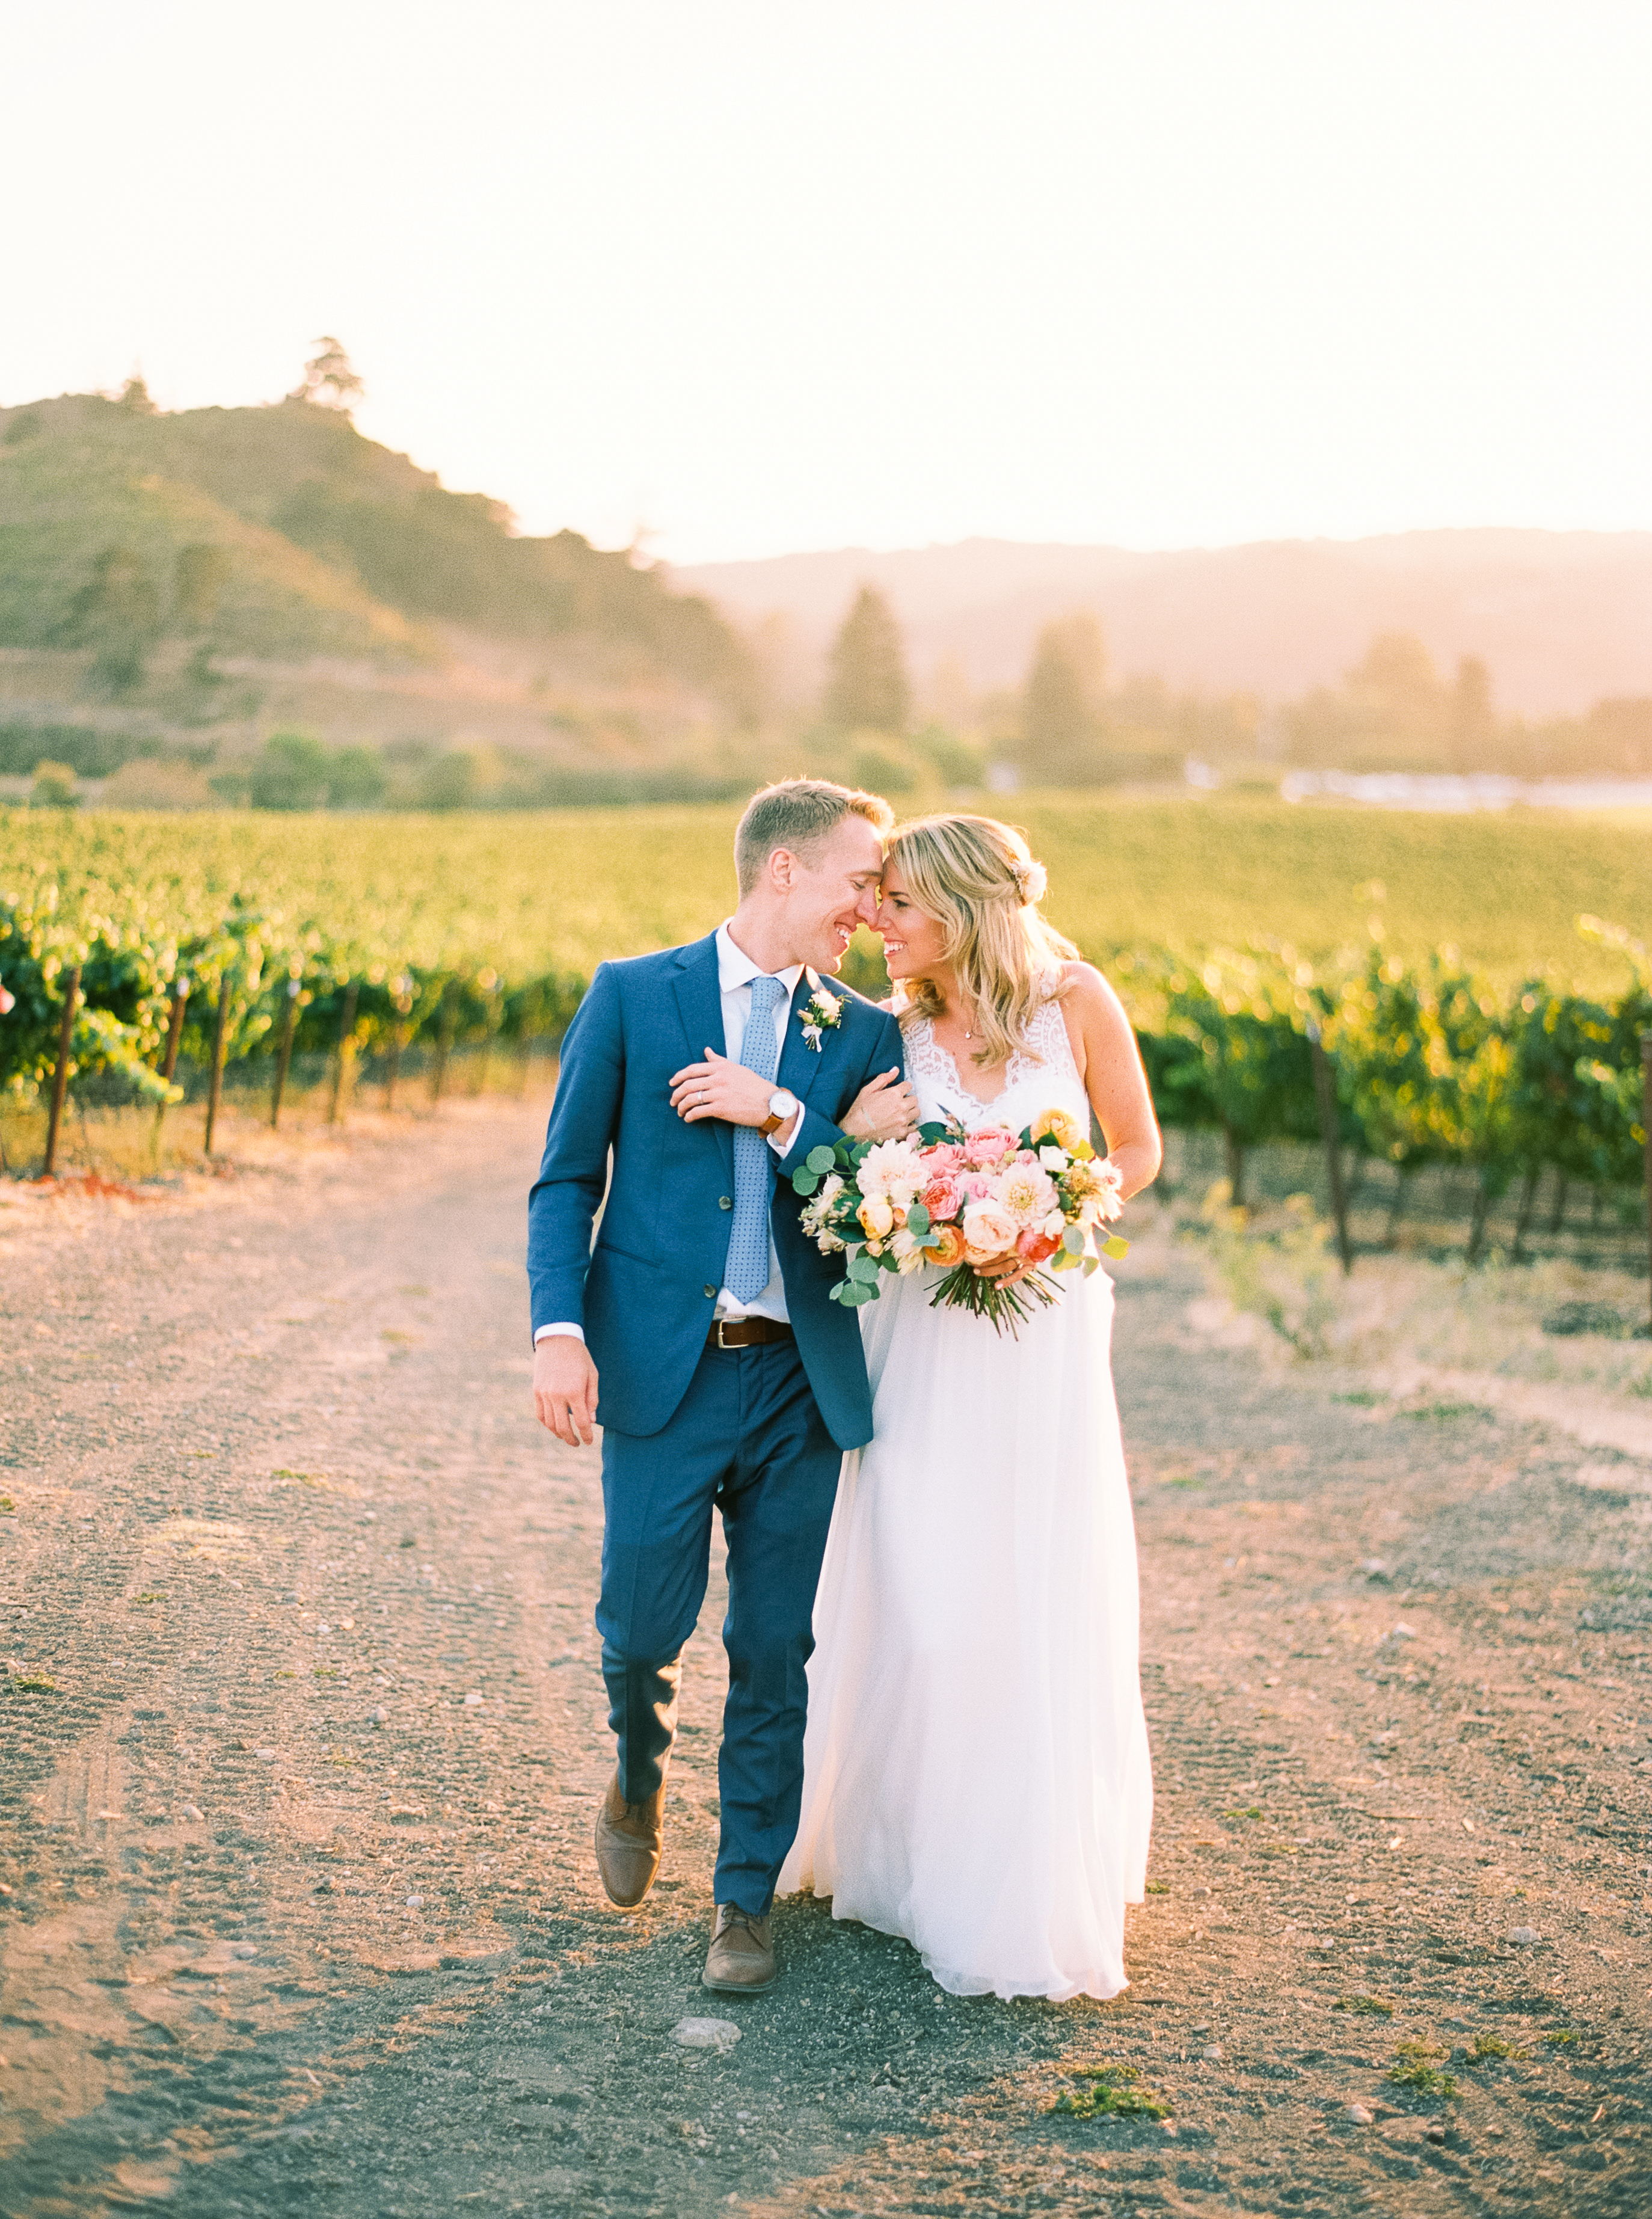 Central Coast Wedding With Travel Inspired Touches Film Wedding